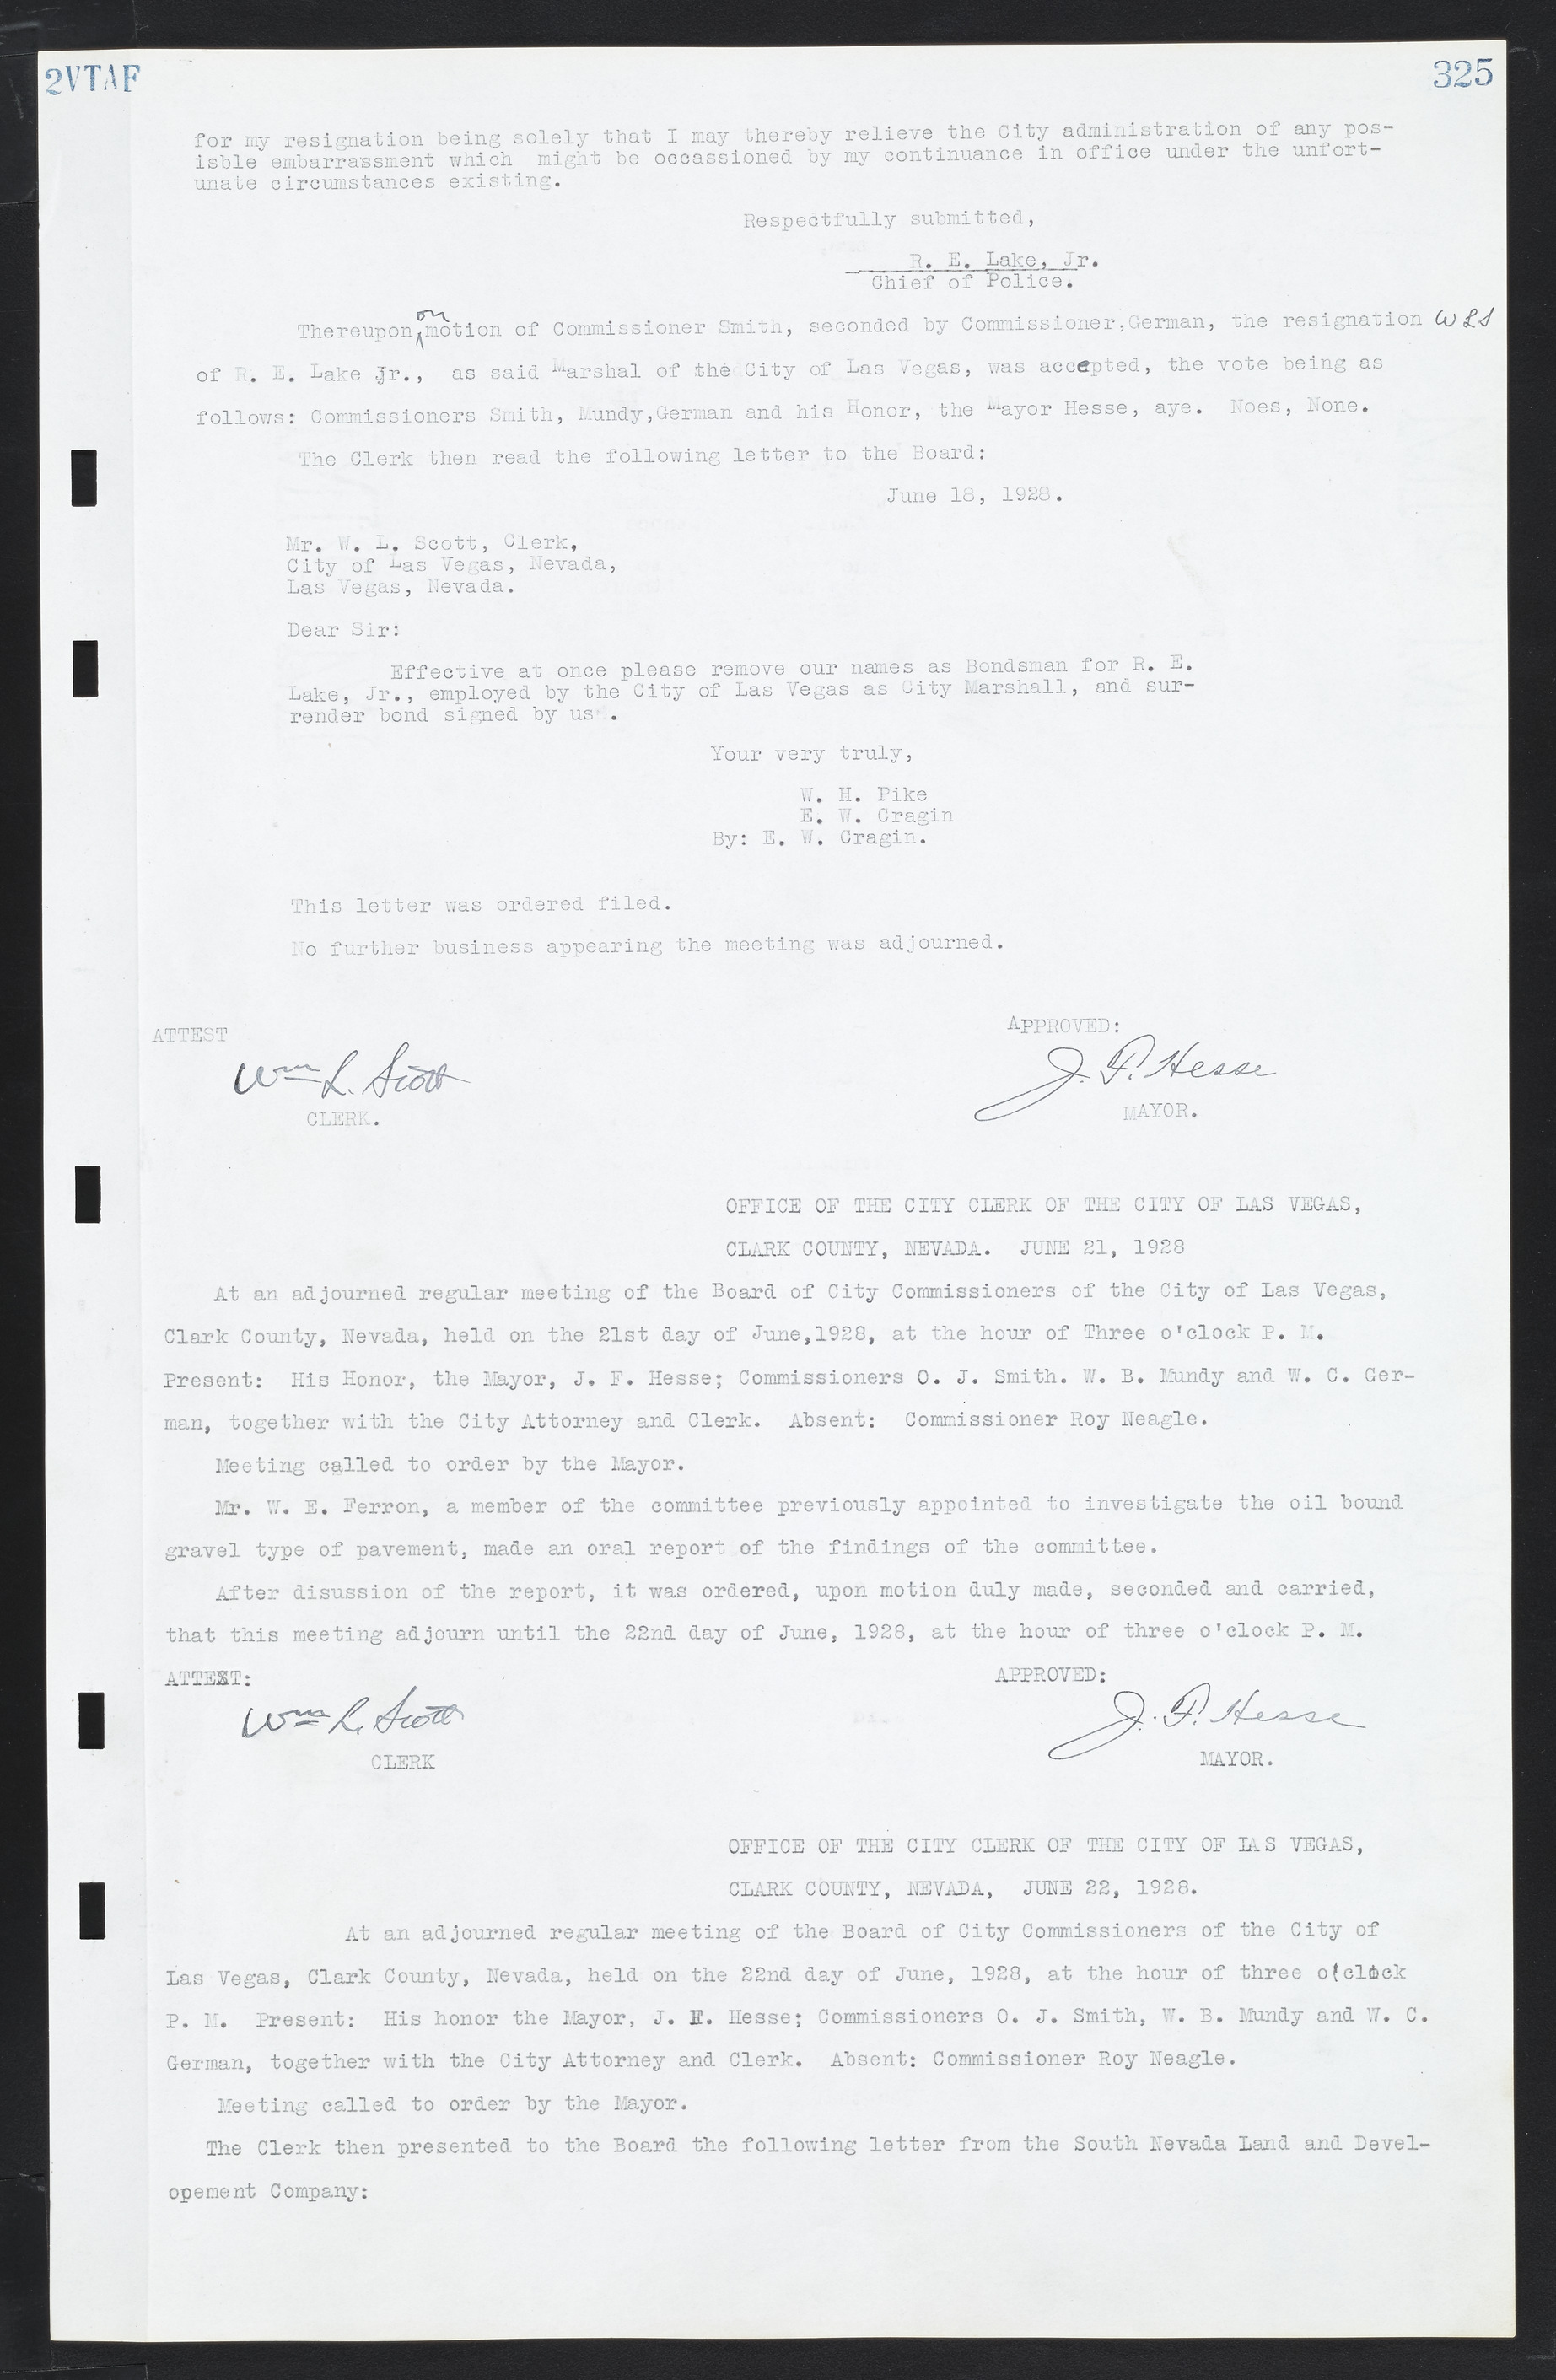 Las Vegas City Commission Minutes, March 1, 1922 to May 10, 1929, lvc000002-334